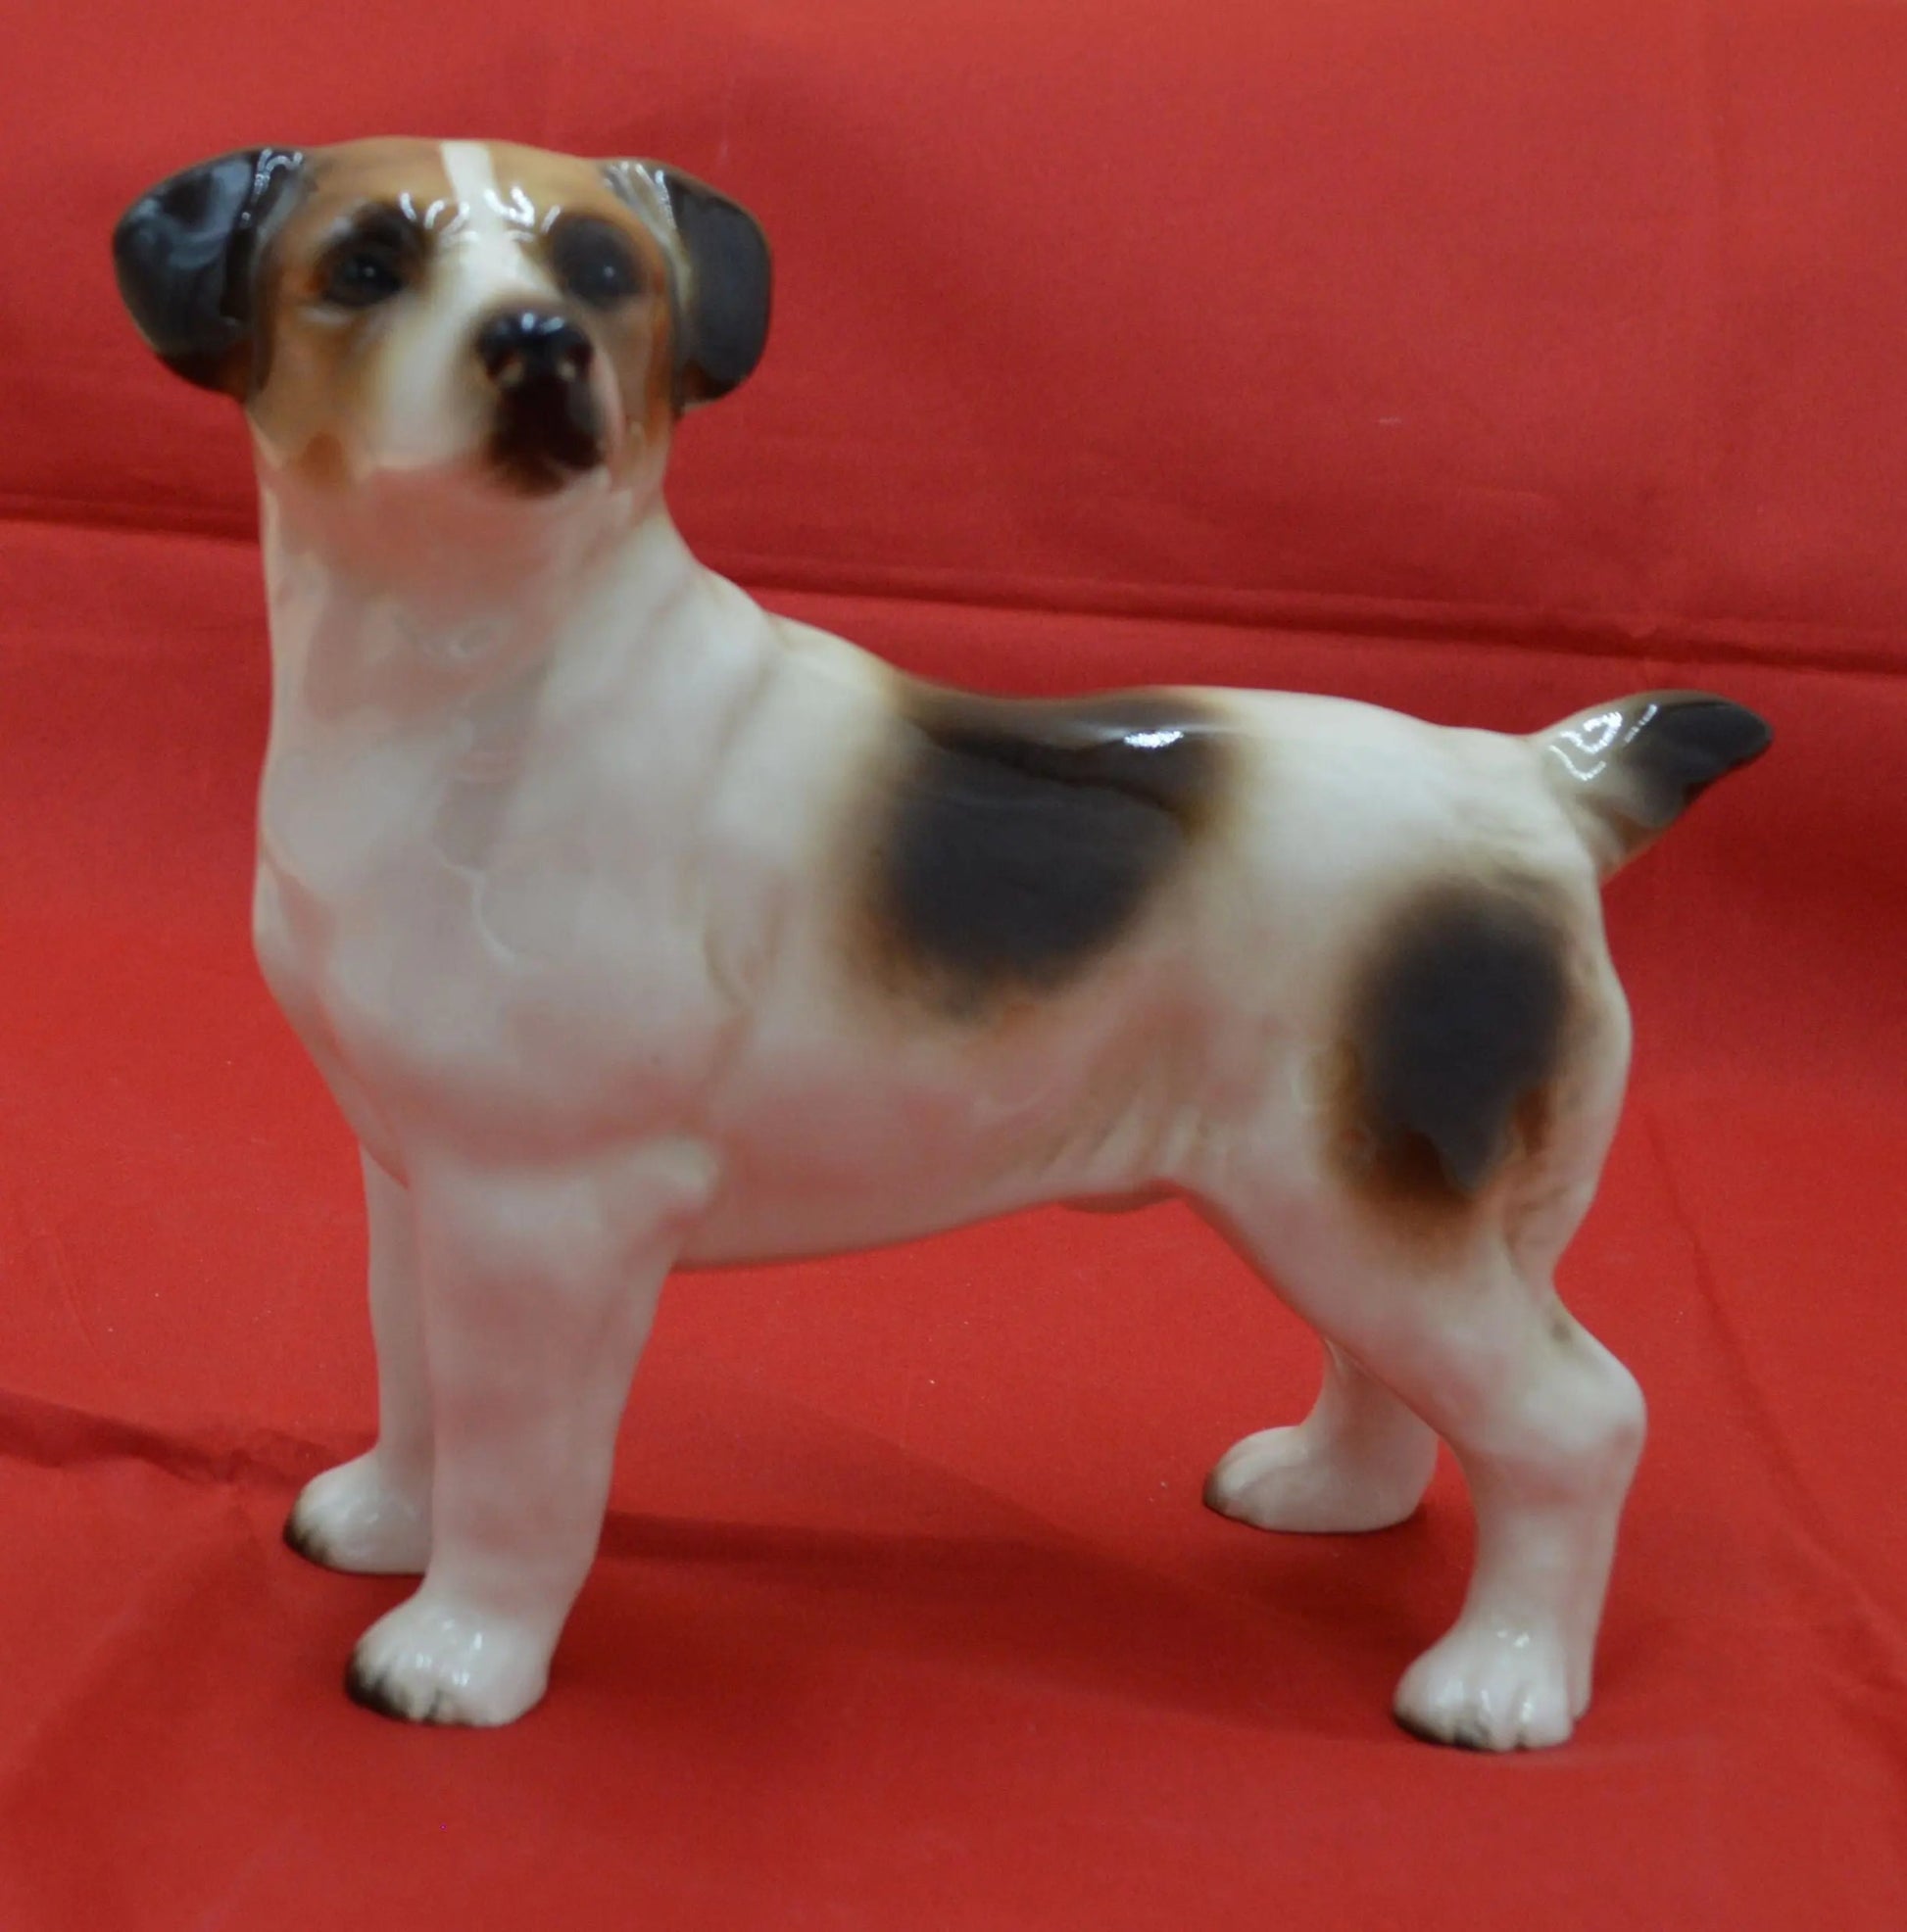 DOG FIGURINE COOPERCRAFT JACK RUSSELL TERRIER(PREVIOUSLY OWNED) GOOD CONDITION - TMD167207